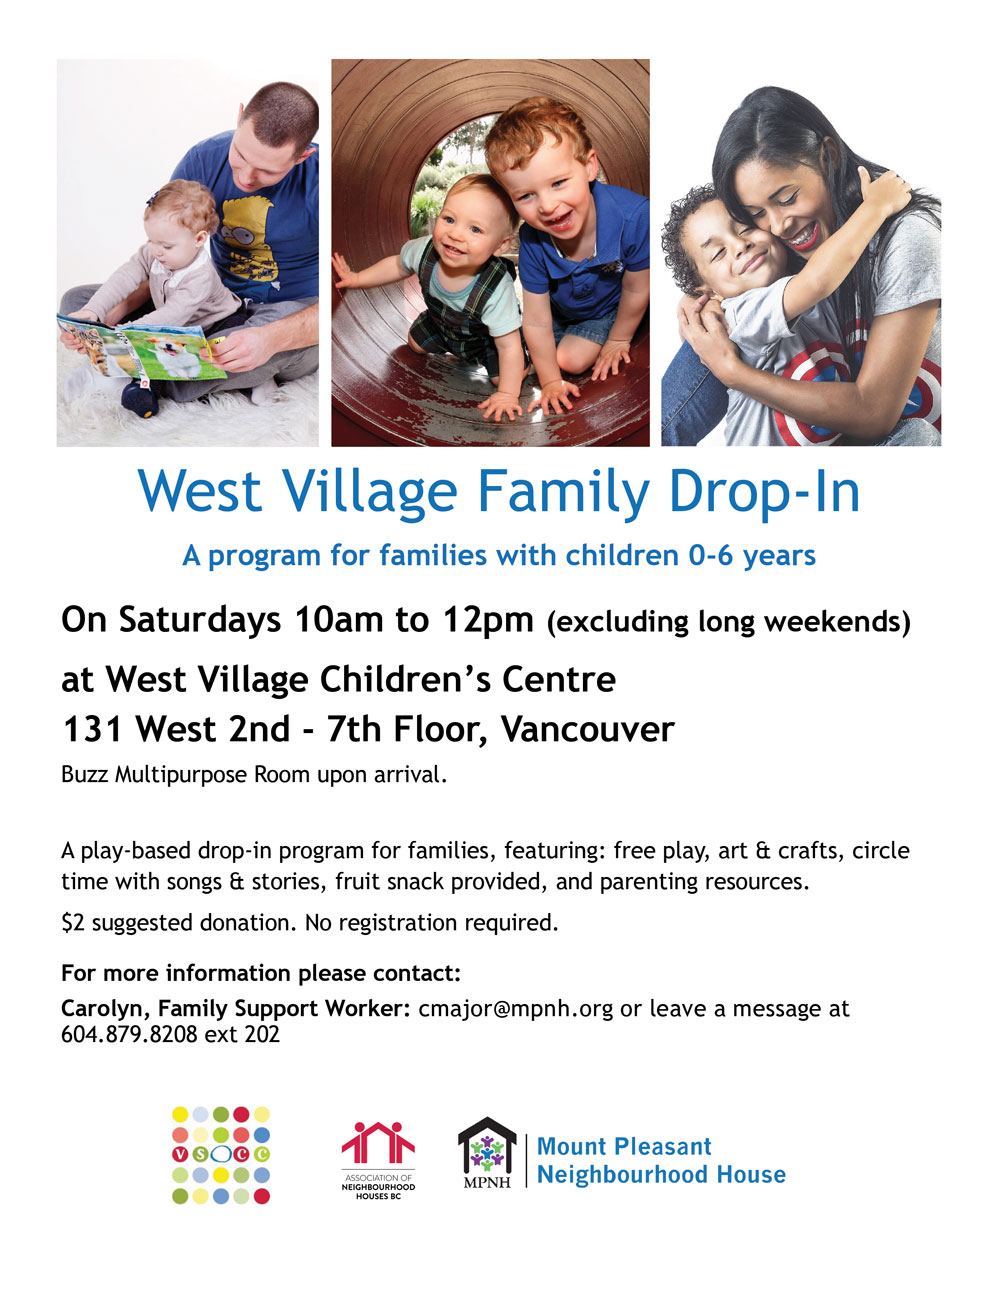 An image of the poster with program details, featuring photos of adults and young children reading and playing together.